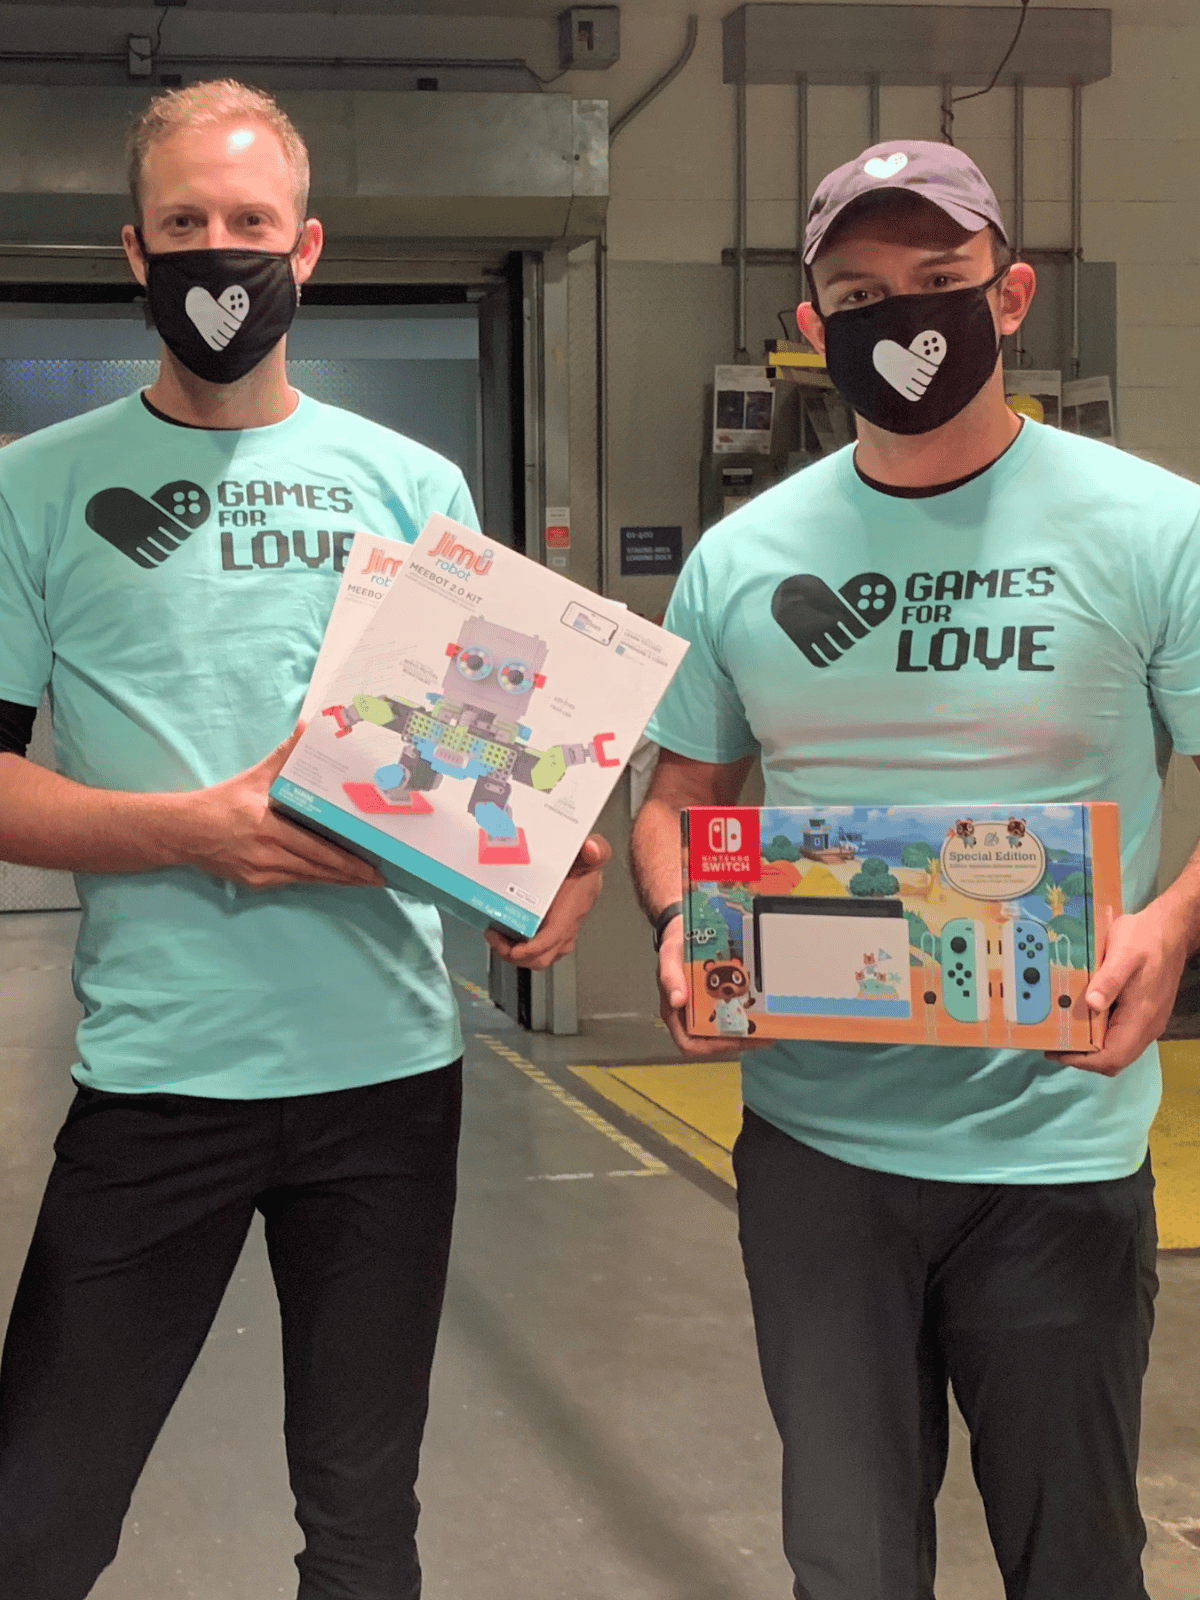 Printful.com and Games for Love Join Forces to Make a Positive Impact